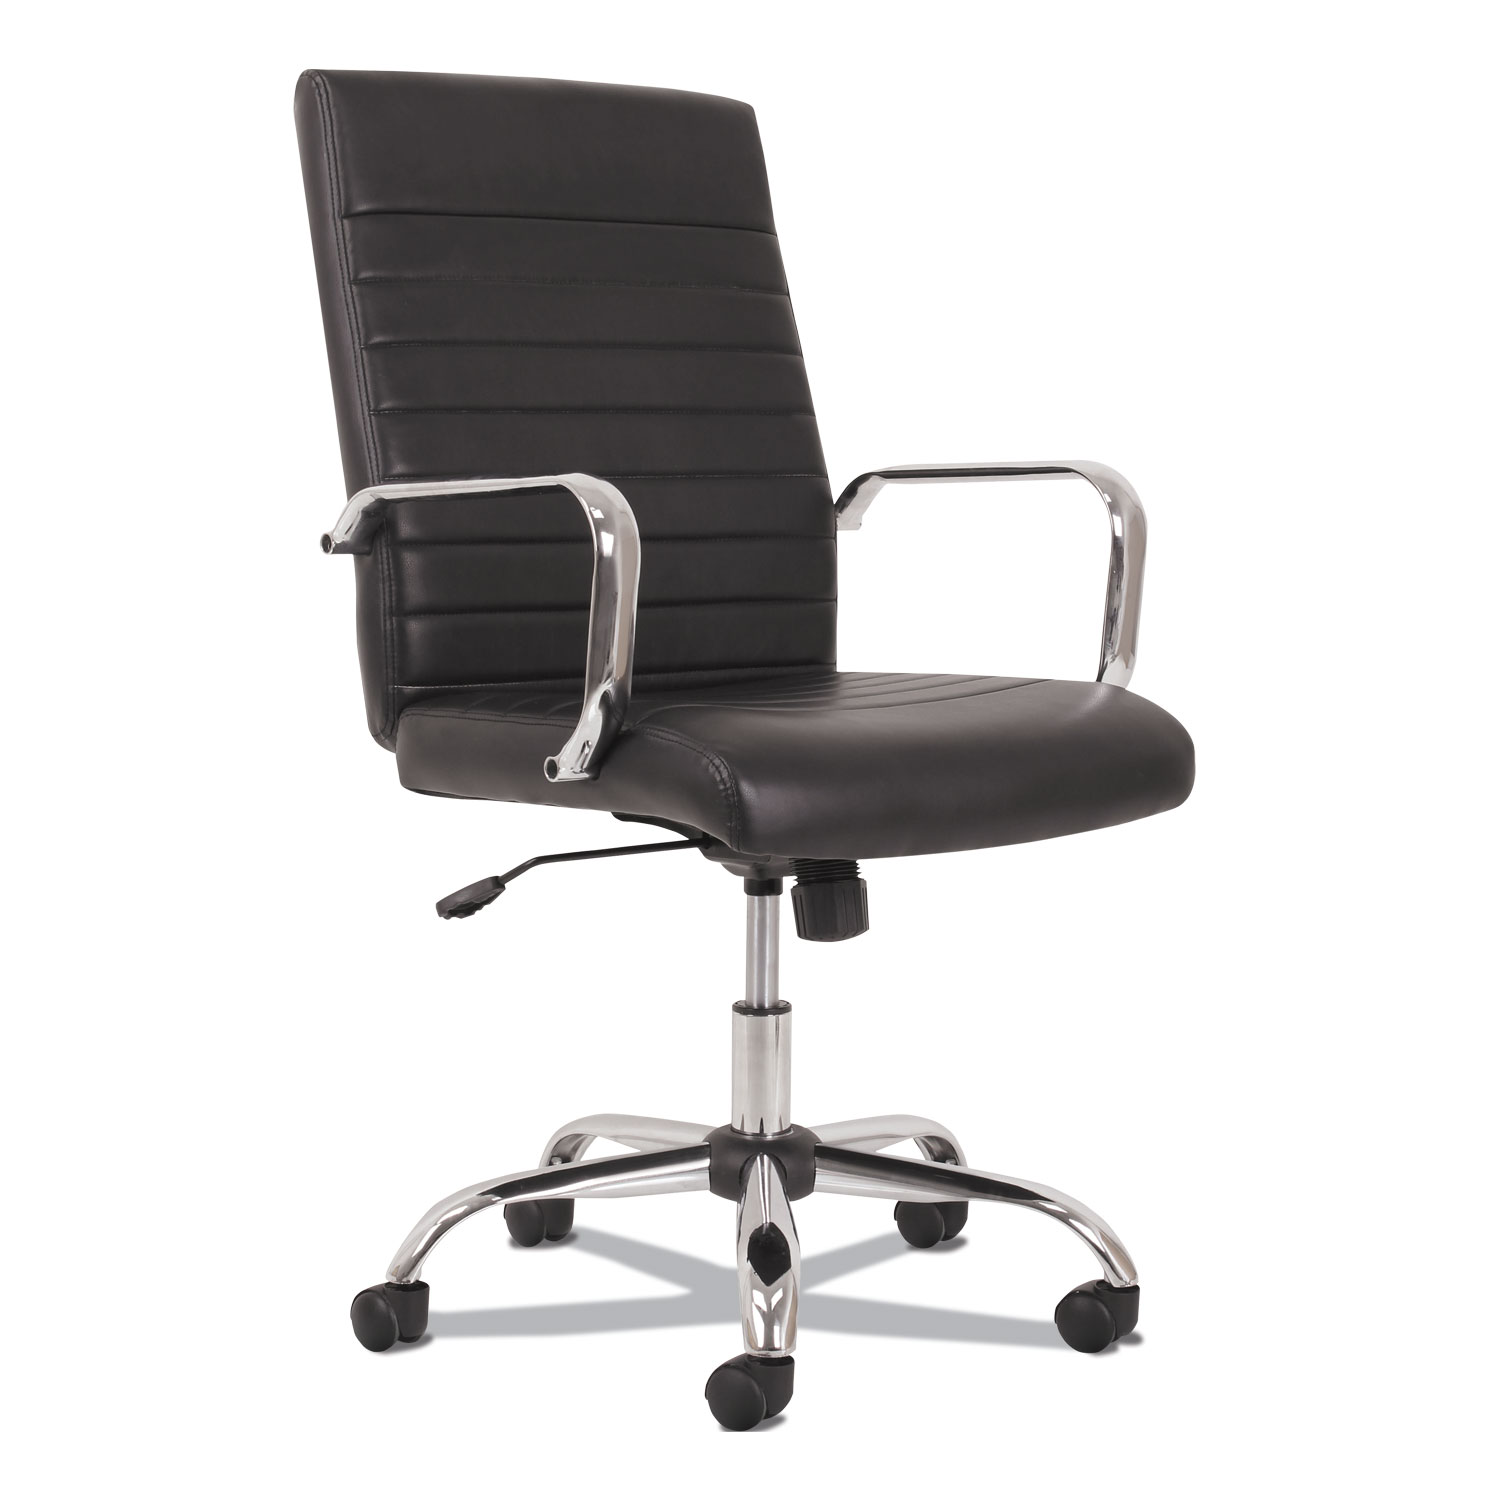  Sadie BSXVST511 5-Eleven Mid-Back Executive Chair, Supports up to 250 lbs., Black Seat/Black Back, Aluminum Base (BSXVST511) 